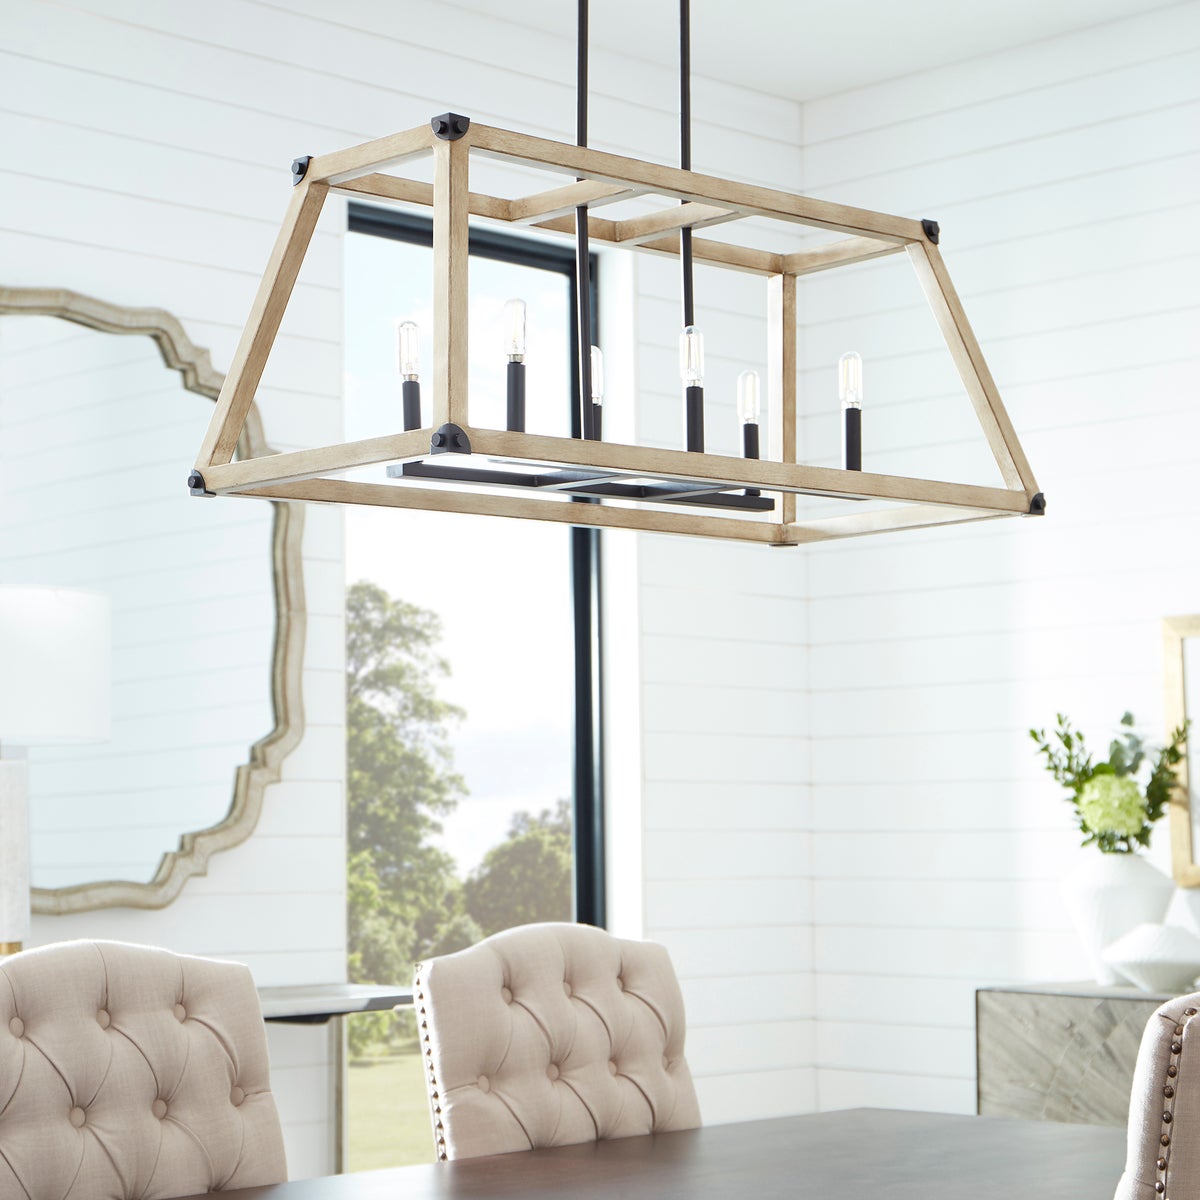 Linear Chandelier with driftwood/noir finish and exposed candelabra bulbs, exuding farmhouse charm. Perfect for rustic style applications.